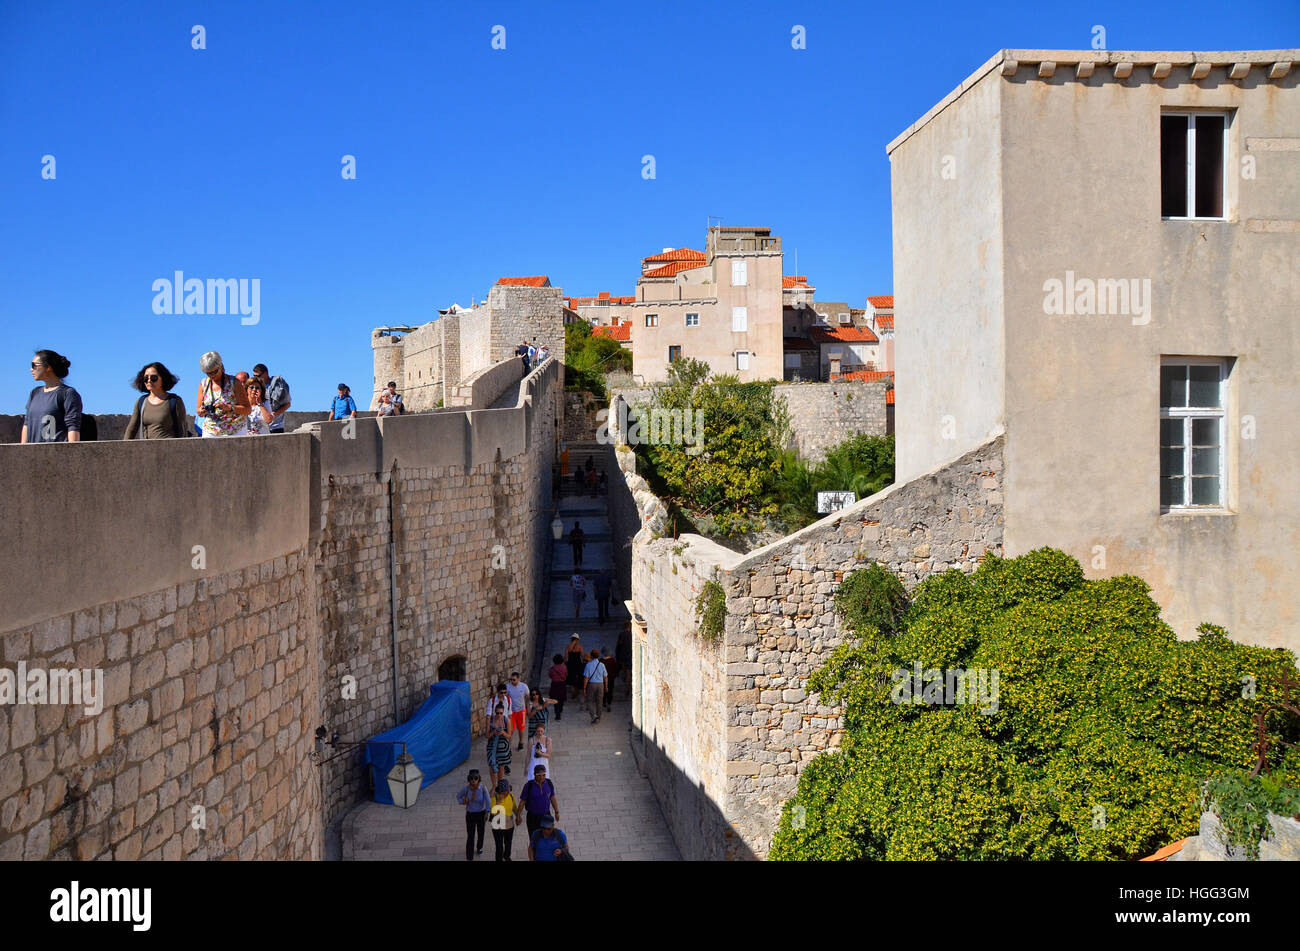 Tourists walk along the wall of the walled city of Dubrovnik, Croatia. Stock Photo